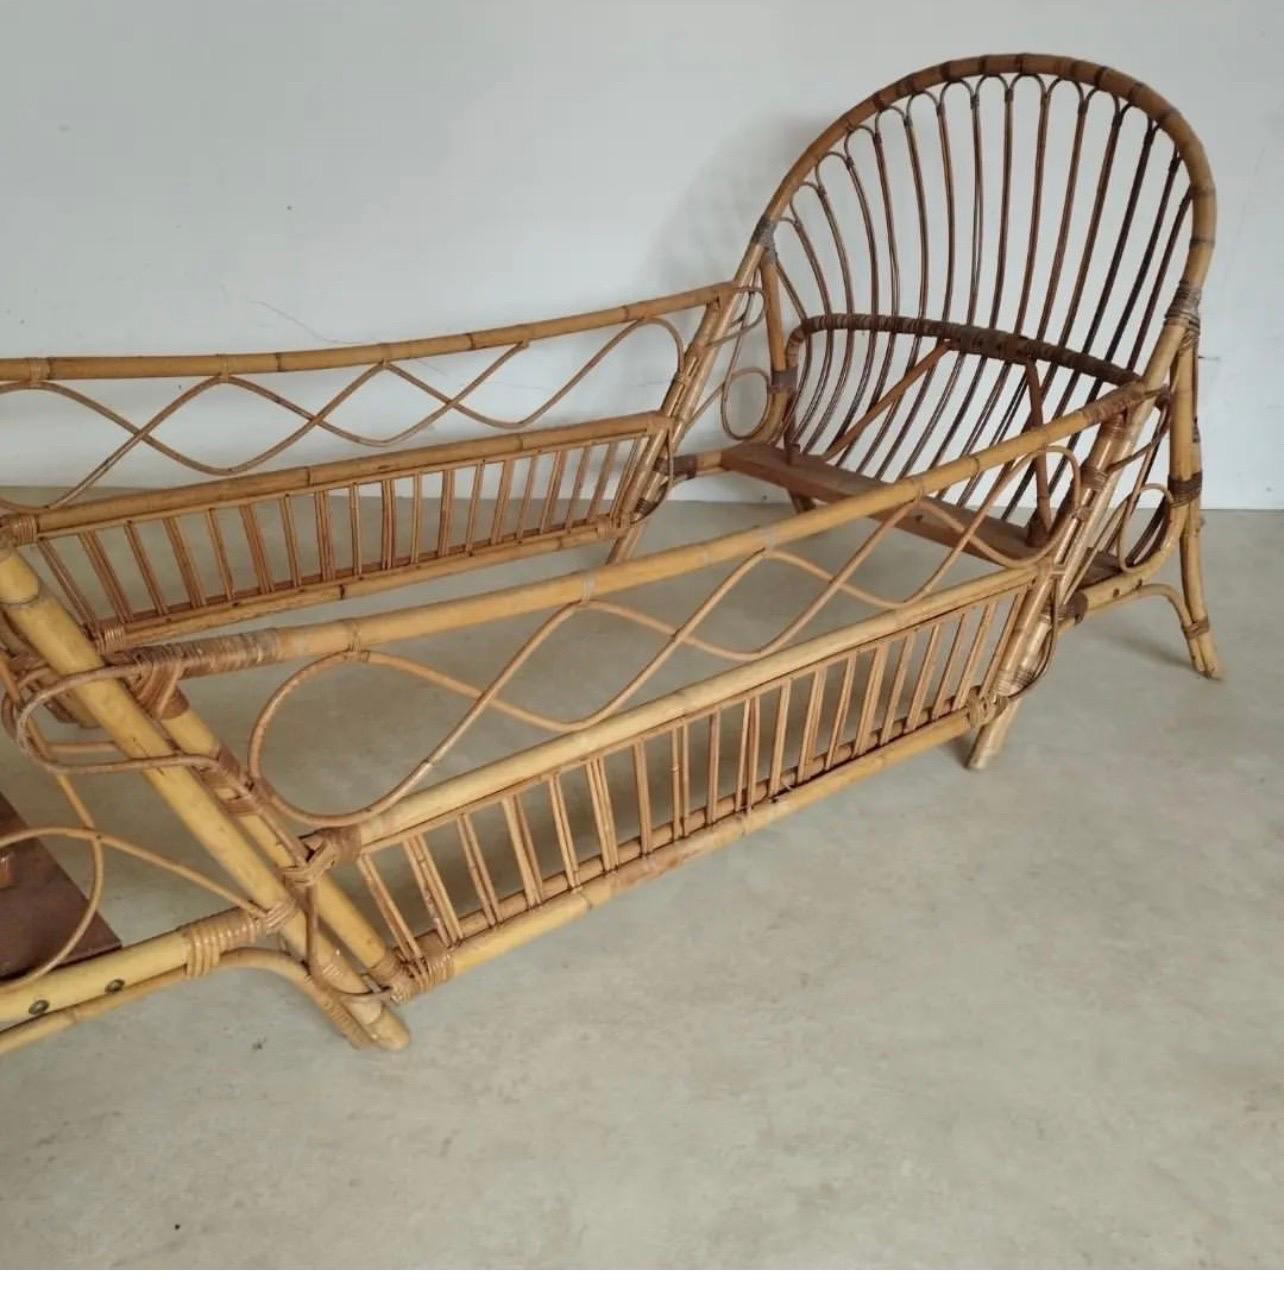 A bamboo bed or daybed.